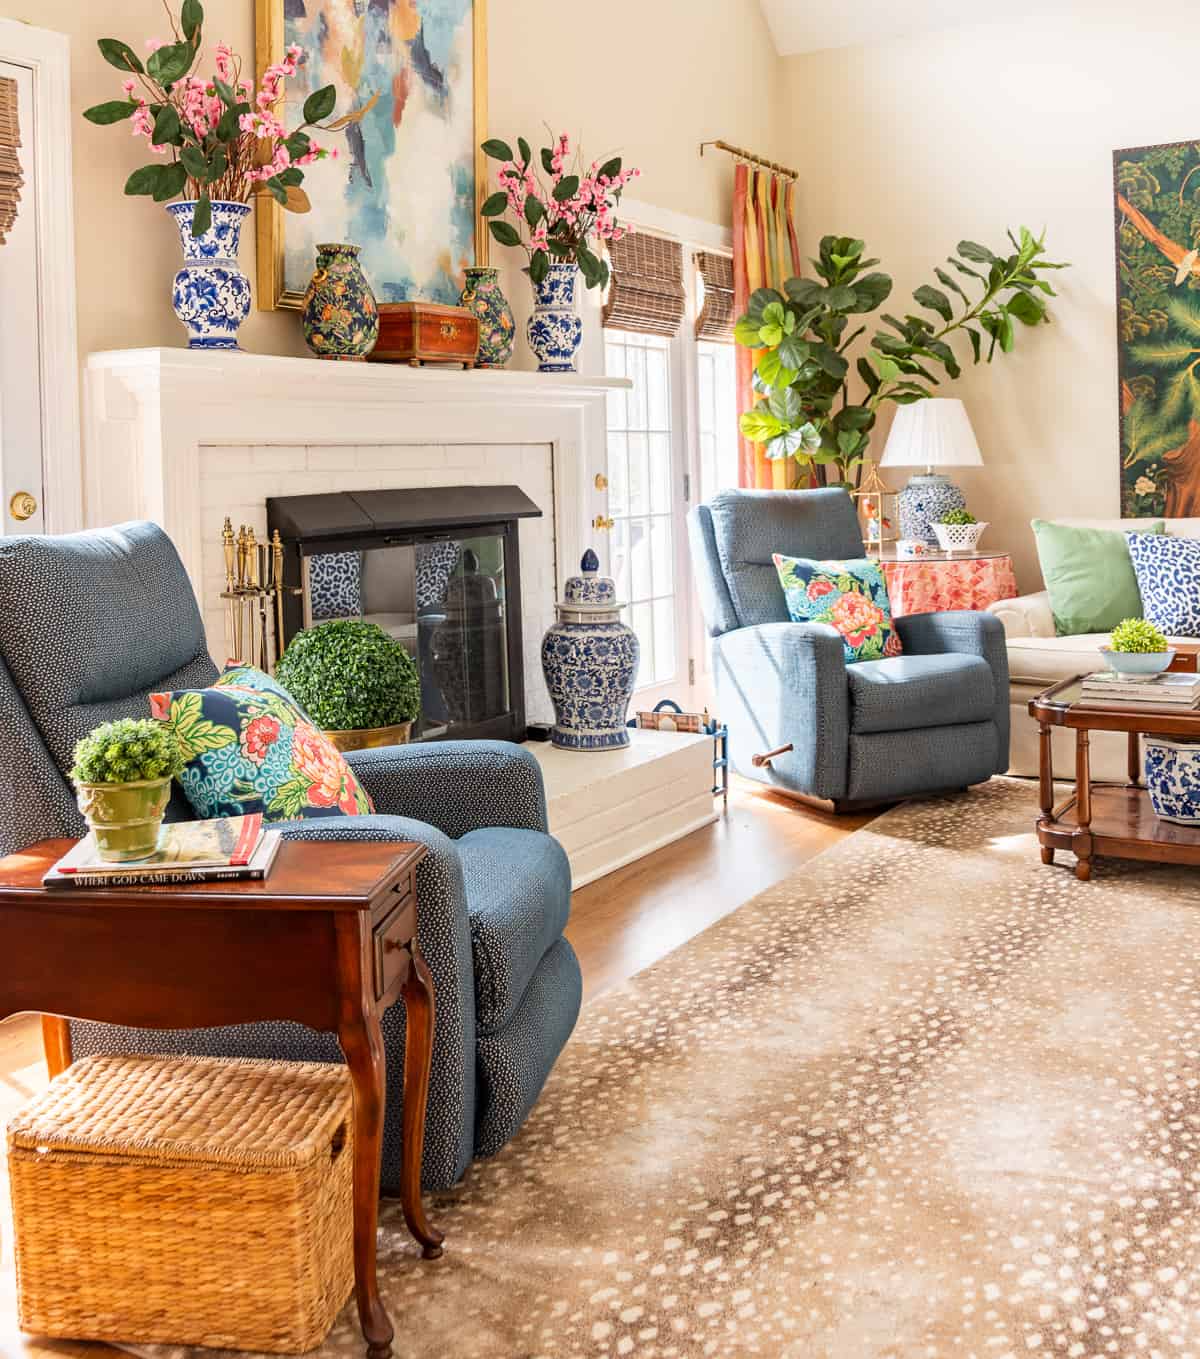 fireplace in a living room decorated in new traditional style with blue recliners, wood tables, colorful accessories and a faux antelope area rug